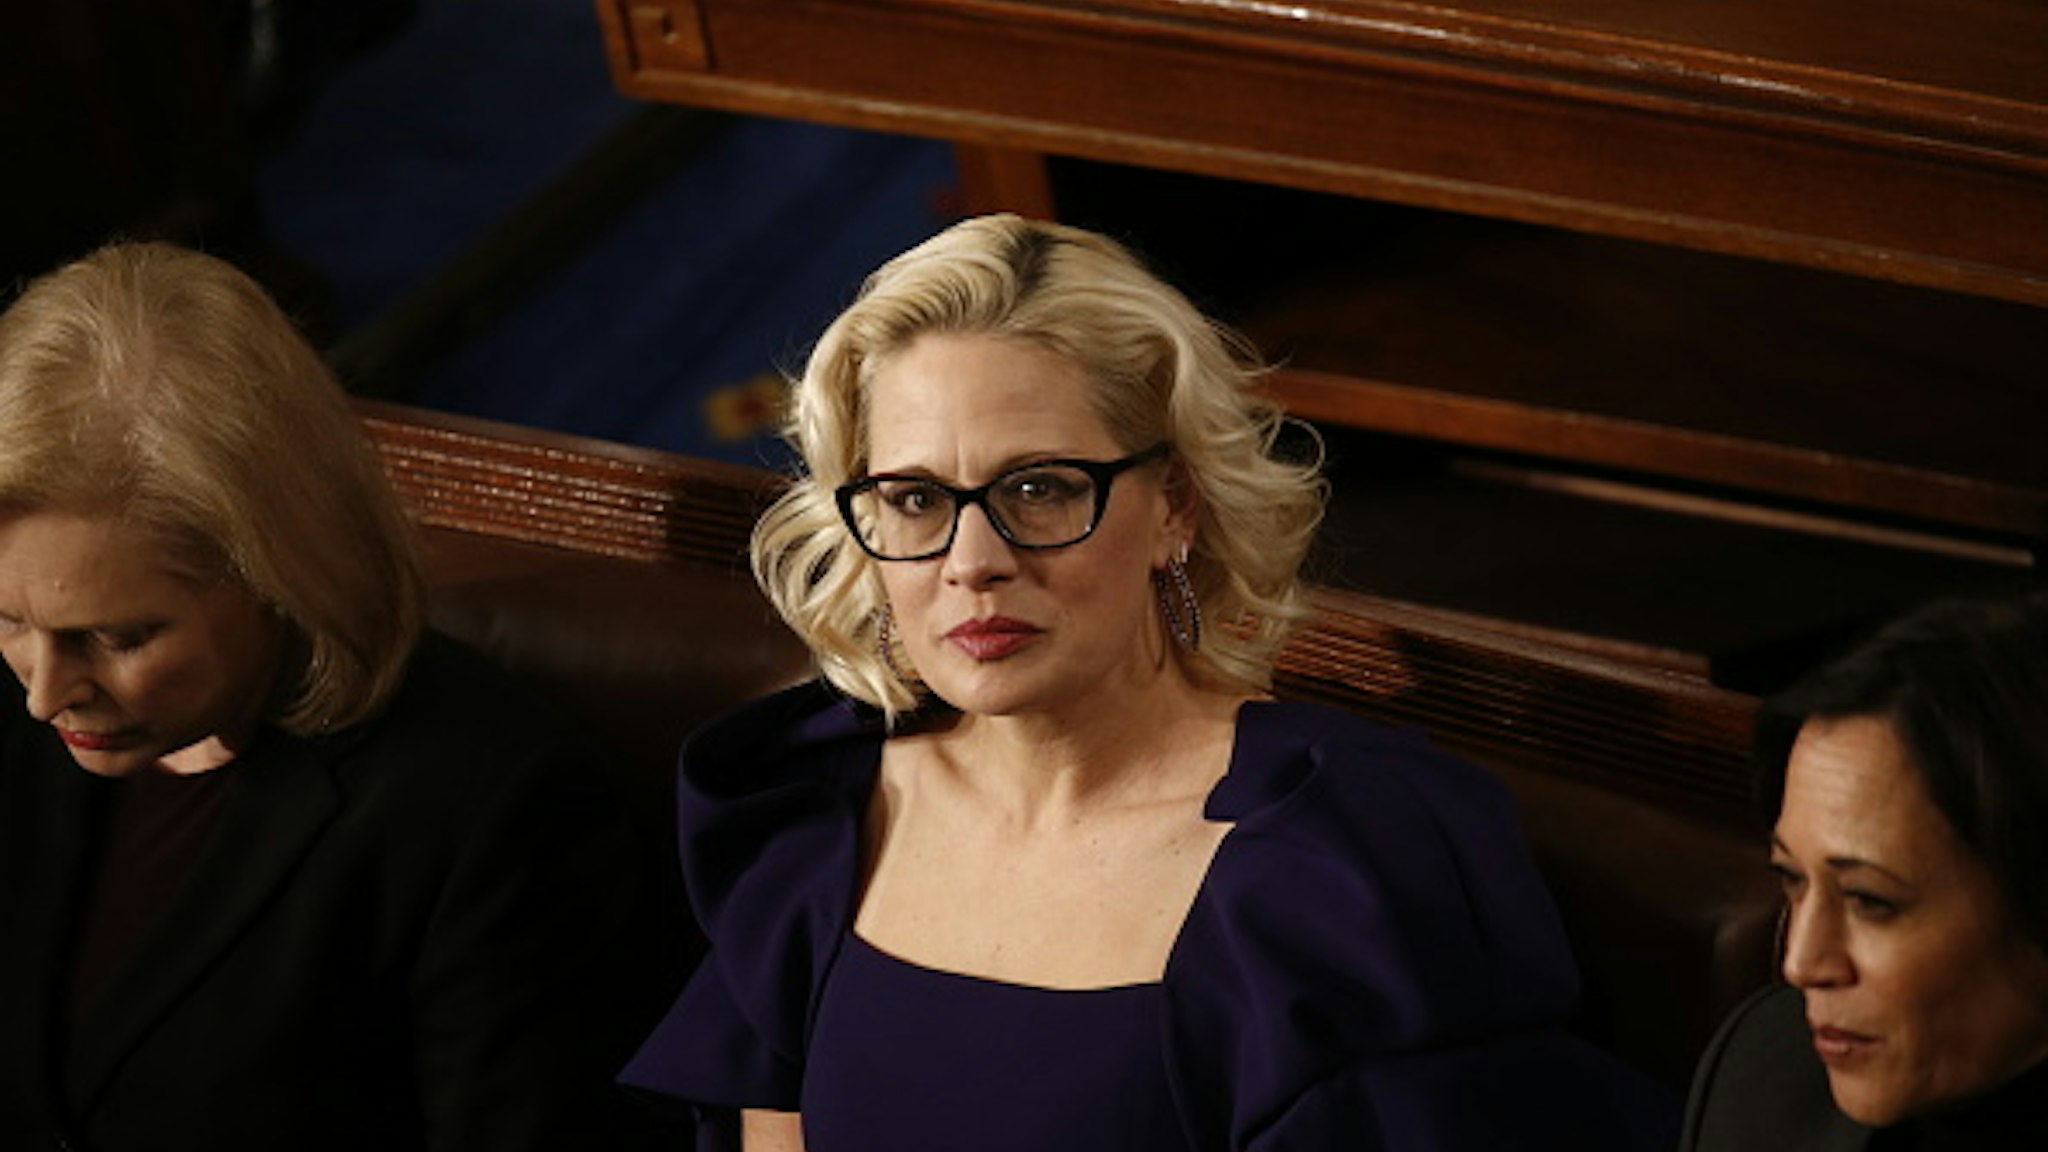 Senator Kyrsten Sinema, a Democrat from Arizona, center, sits ahead of a State of the Union address to a joint session of Congress at the U.S. Capitol in Washington, D.C., U.S., on Tuesday, Feb. 4, 2020. President Donald Trump will try to move past his impeachment and make a case for his re-election in Tuesday's State of the Union address by taking credit for a strong economy, newly signed trade deals and an immigration crackdown.